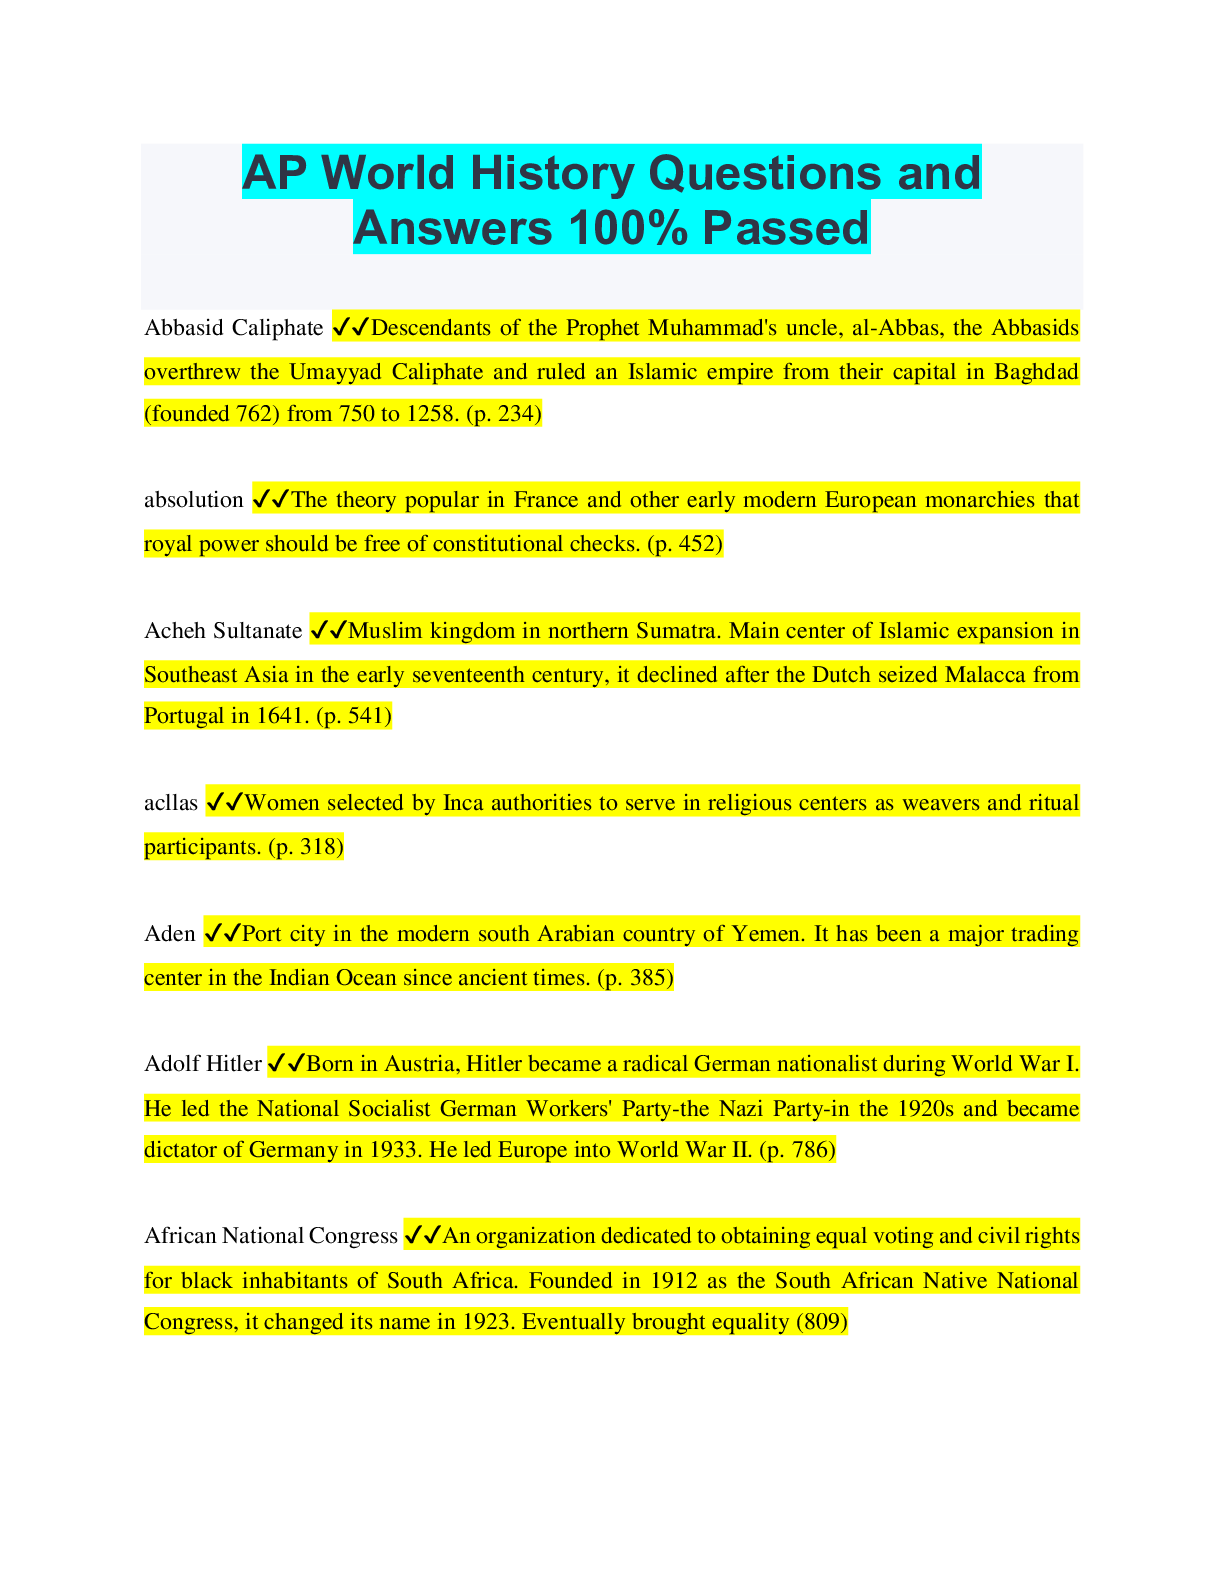 AP World History Questions and Answers 100 Passed